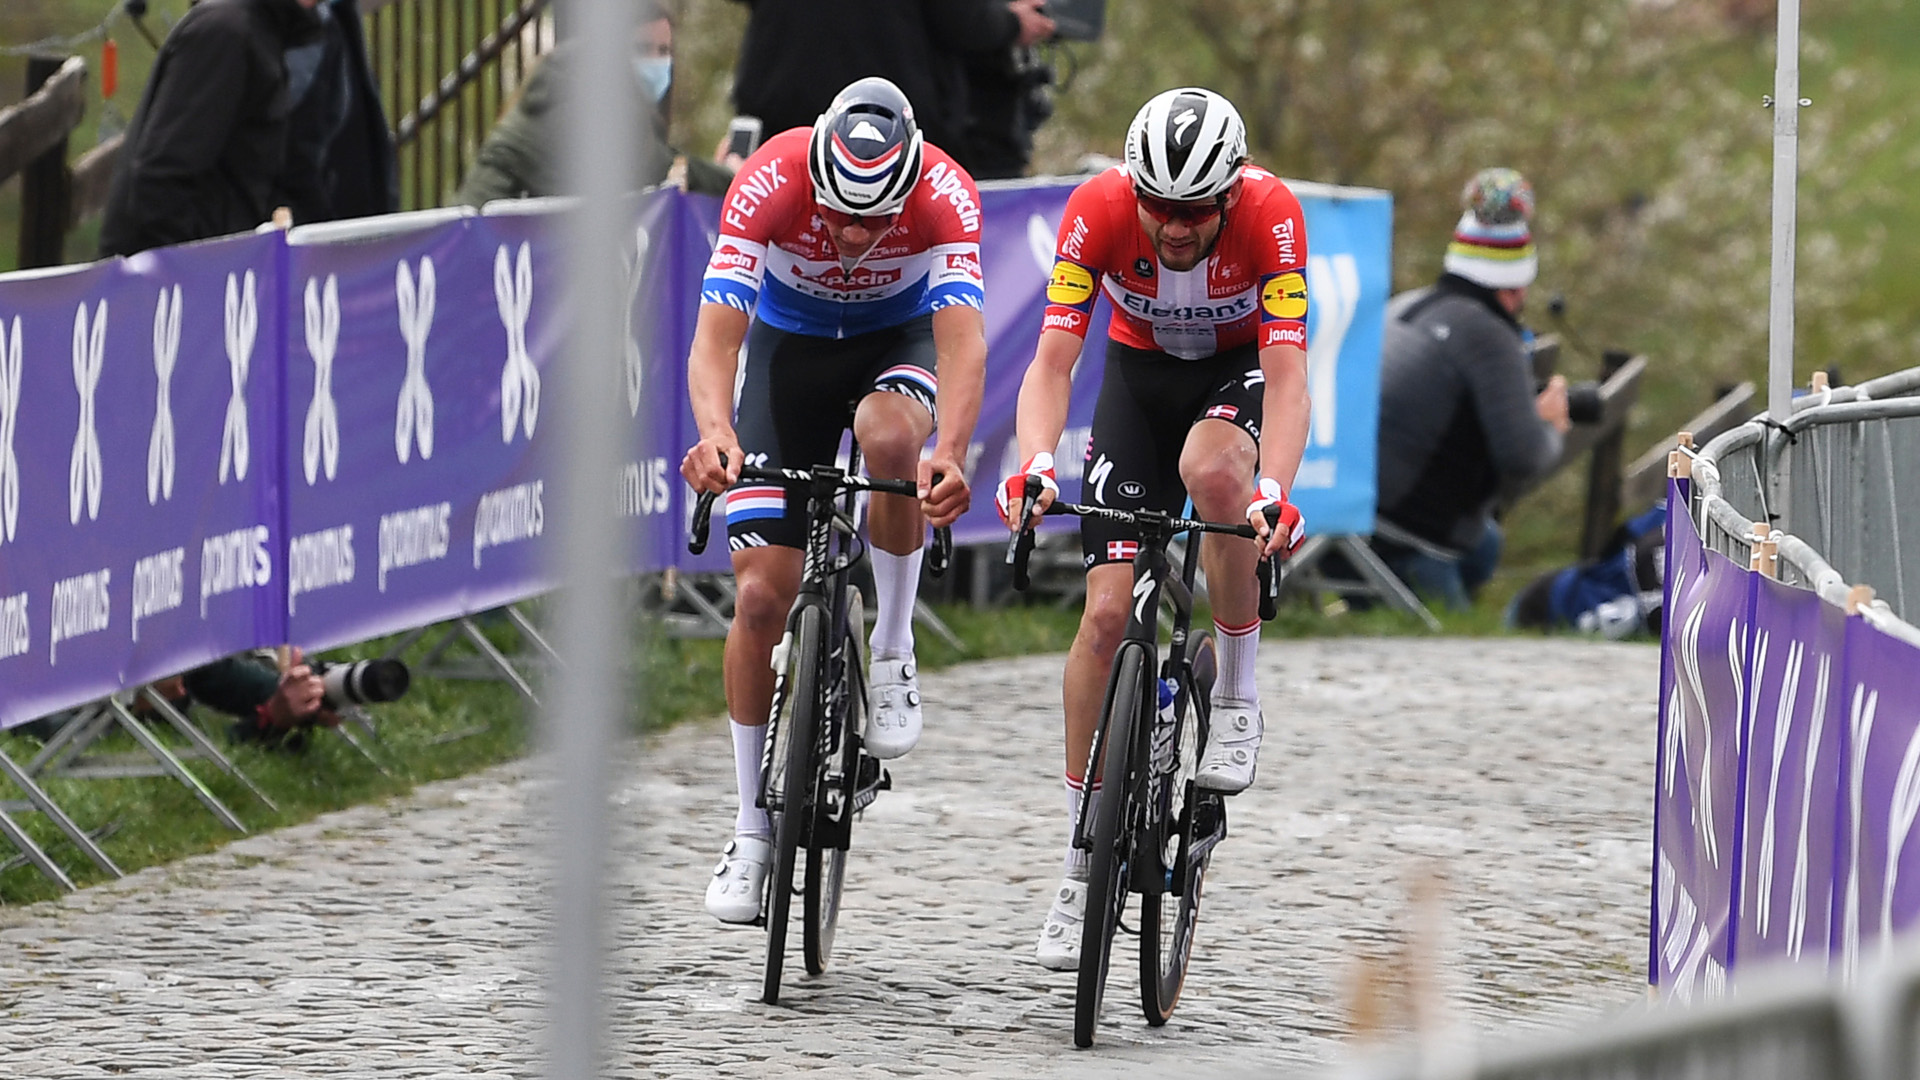 Tour of Flanders live stream 2022 how to watch UCI cycling online and